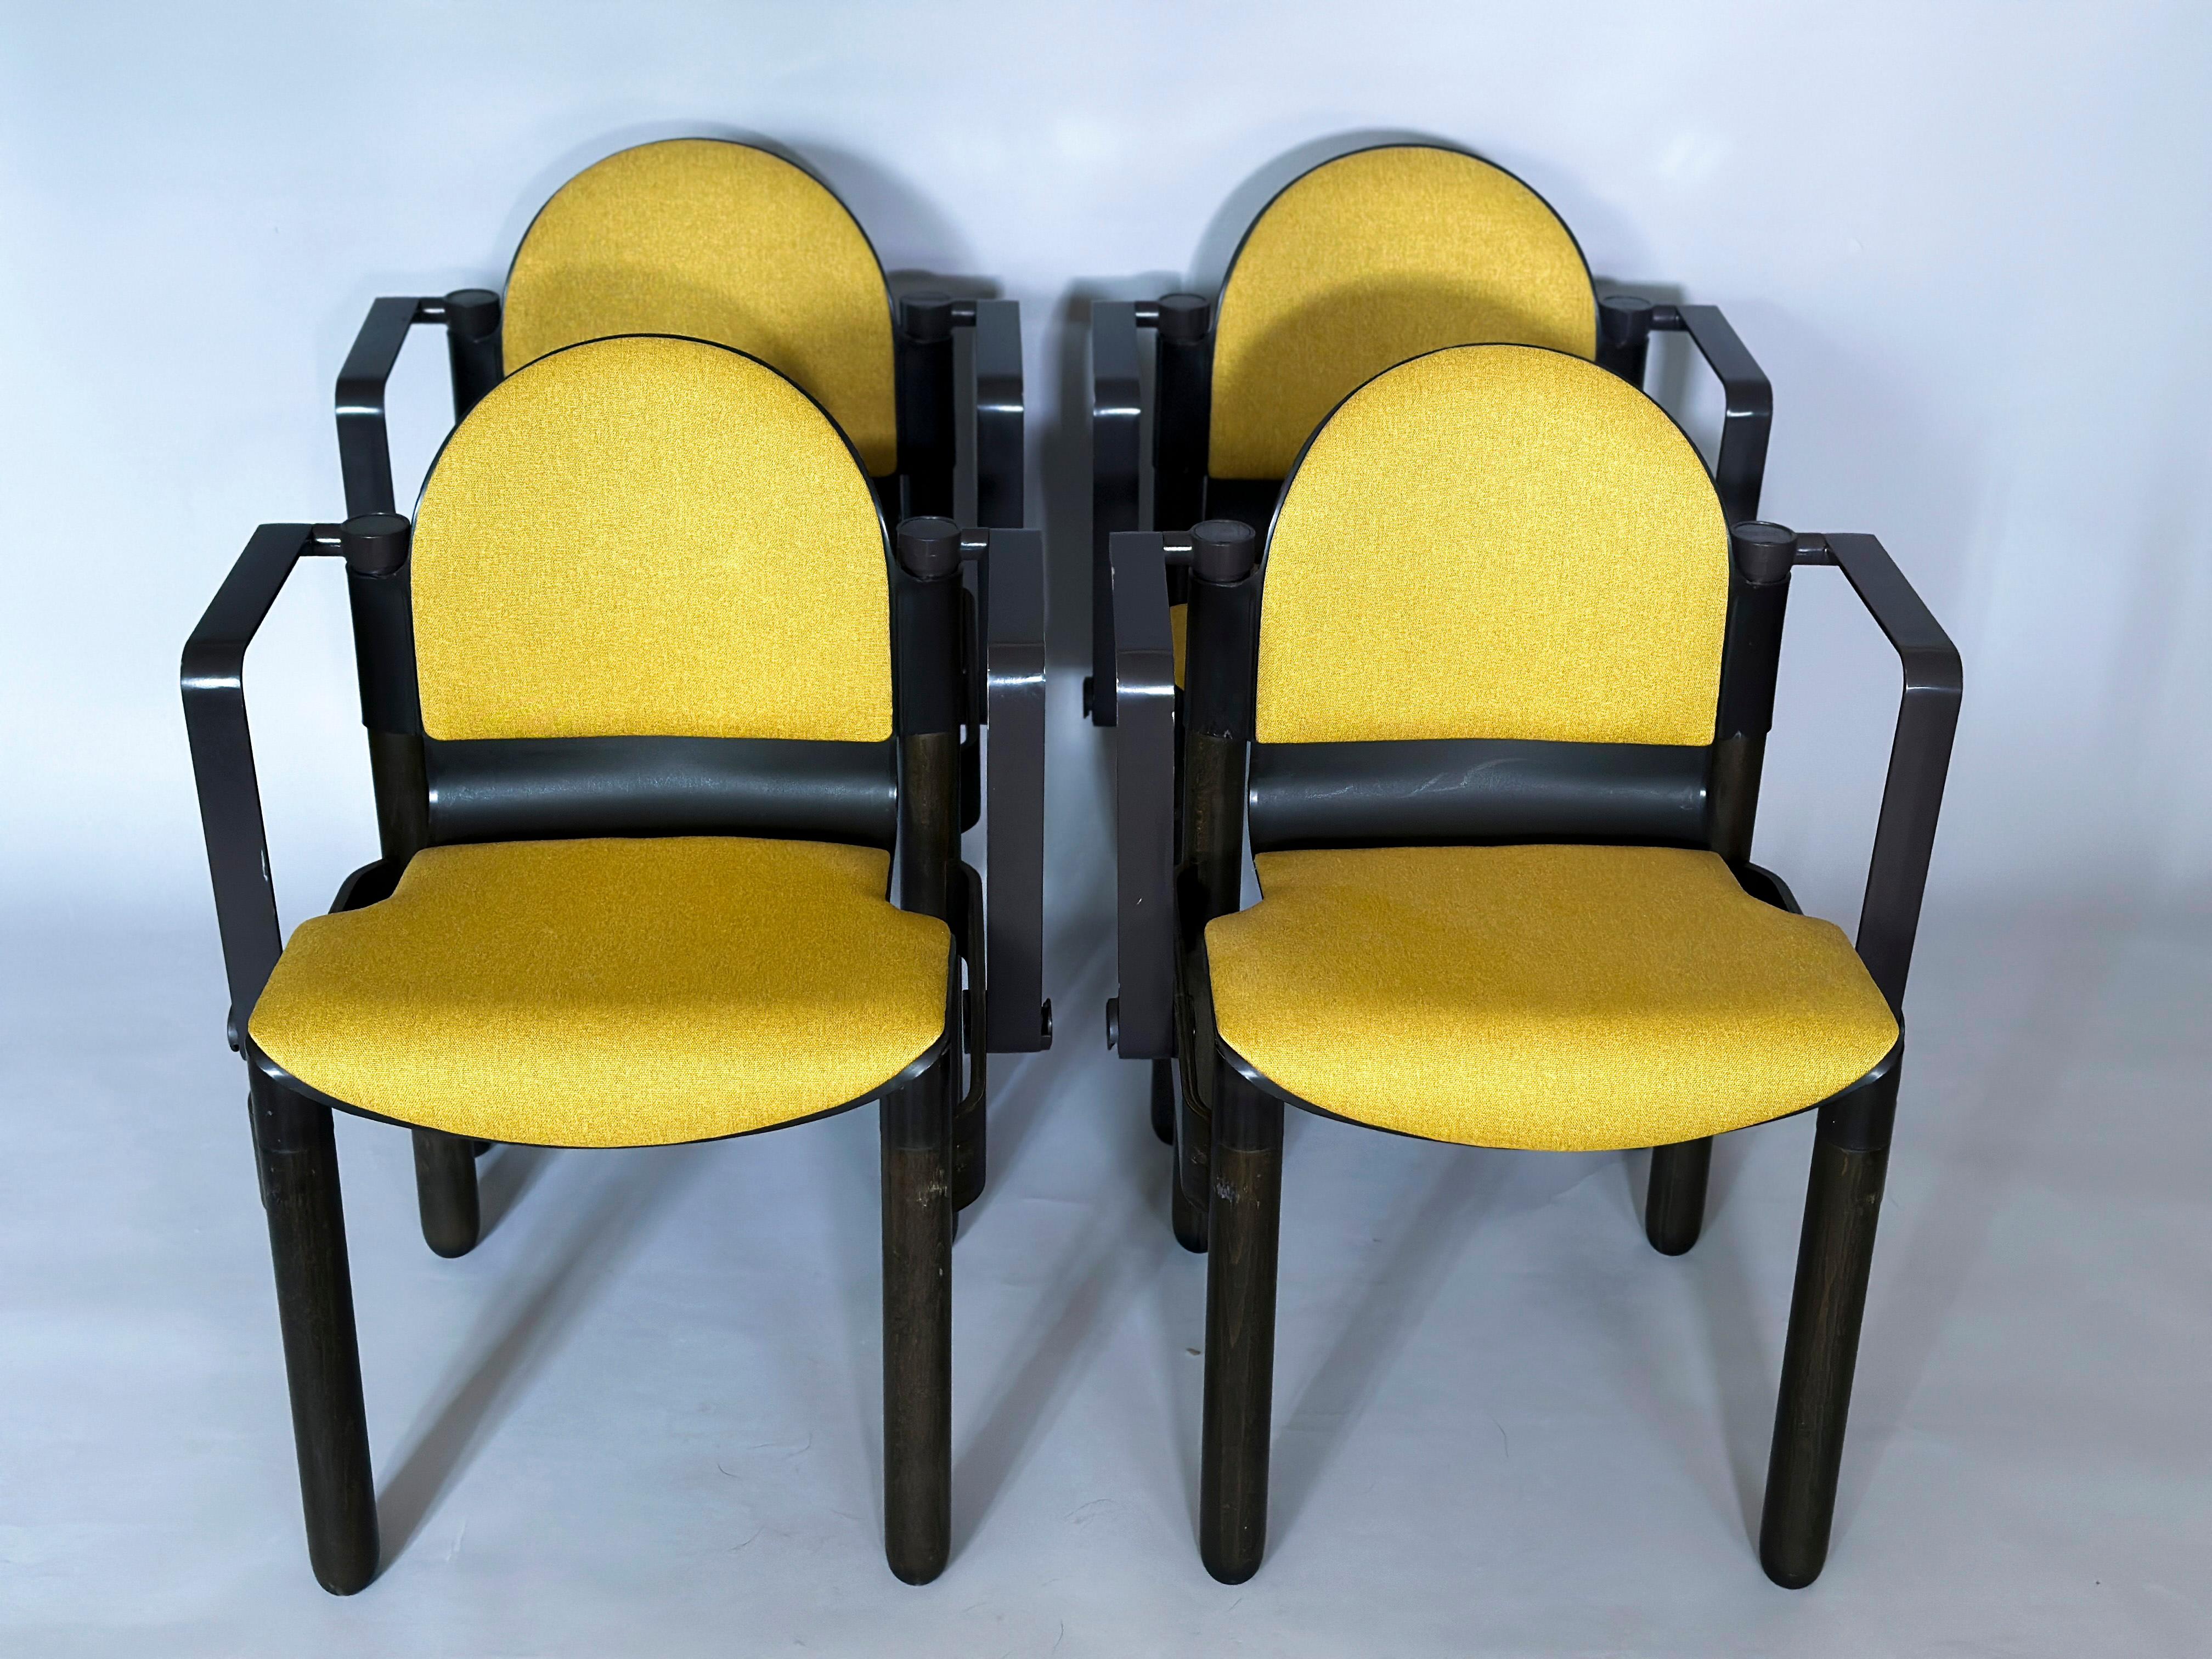 Set of four chairs by Gerd Lange for Thonet.